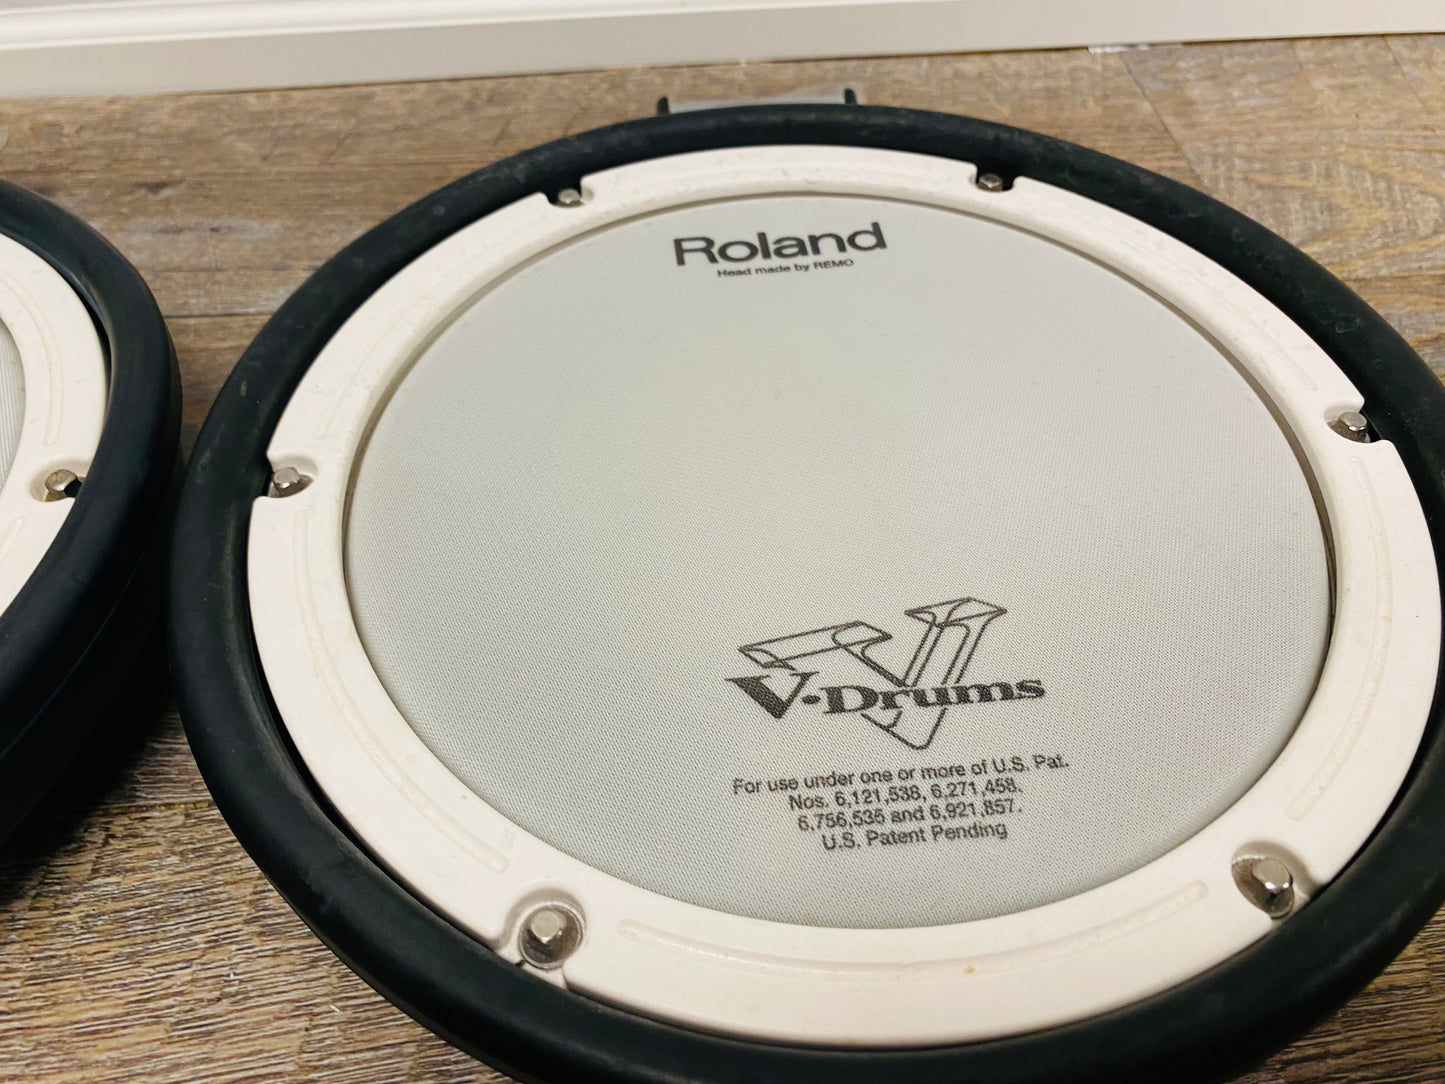 Roland Pad Set of 4 Mesh Pads for Kit PDX-8 PDX6